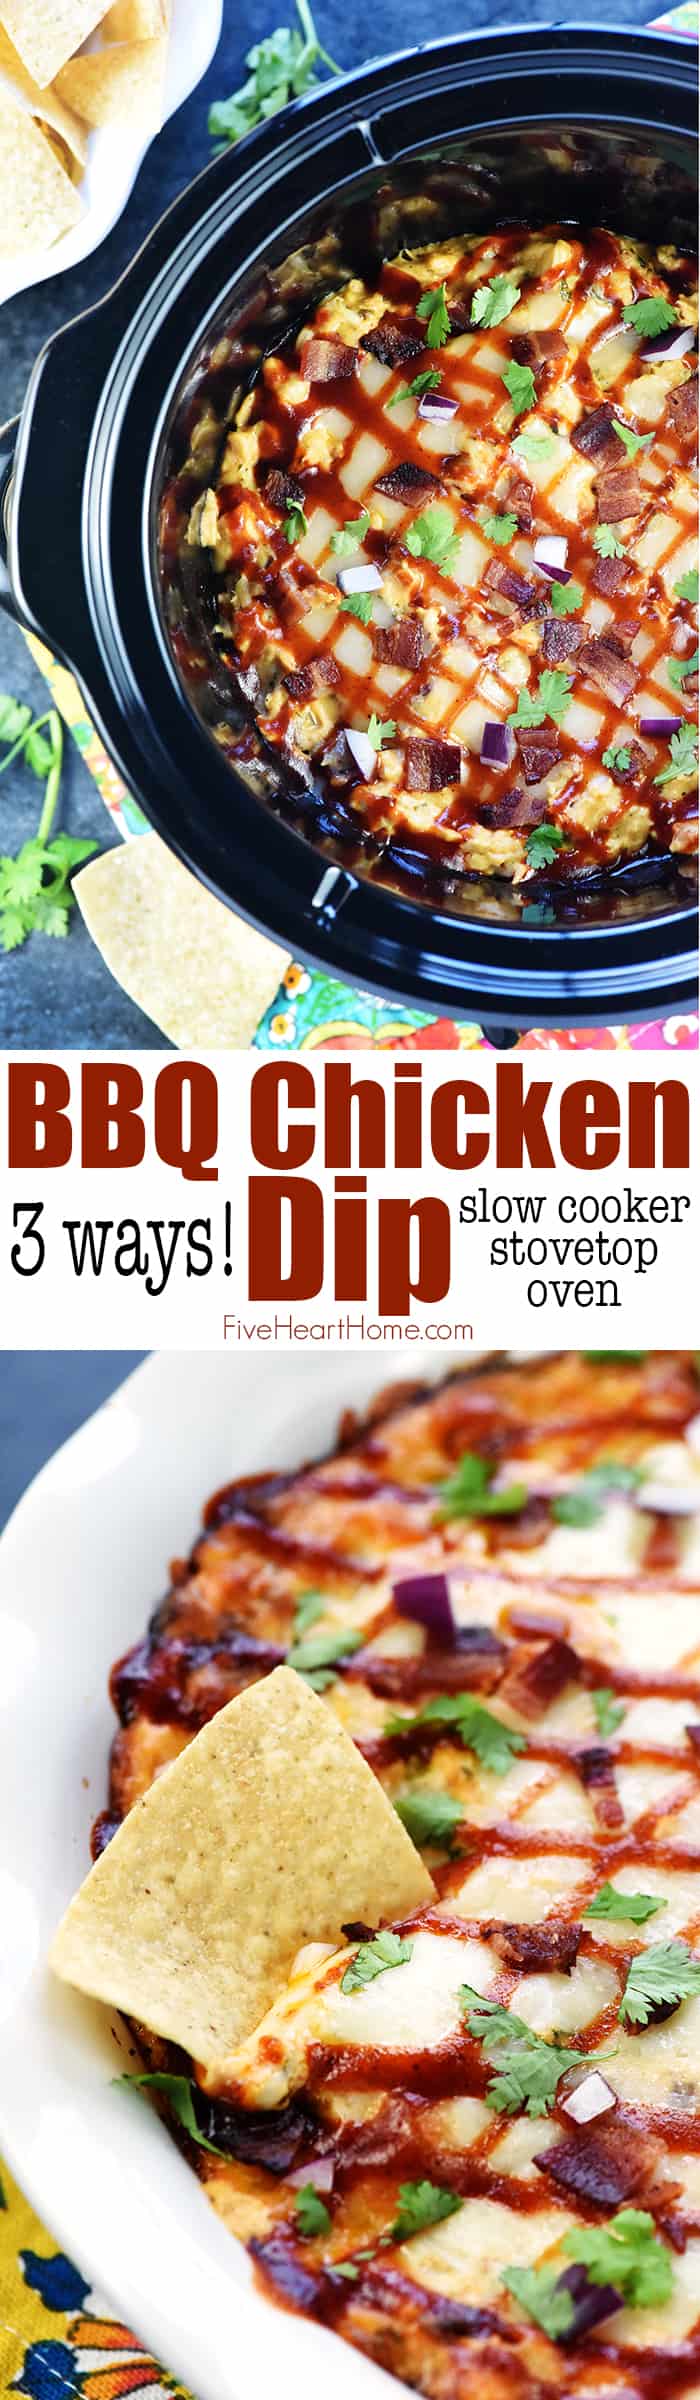 BBQ Chicken Dip ~ a creamy, zippy, decadent appetizer recipe that can be made in the slow cooker, on the stovetop, or in the oven, perfect for parties and football tailgating! | FiveHeartHome.com via @fivehearthome